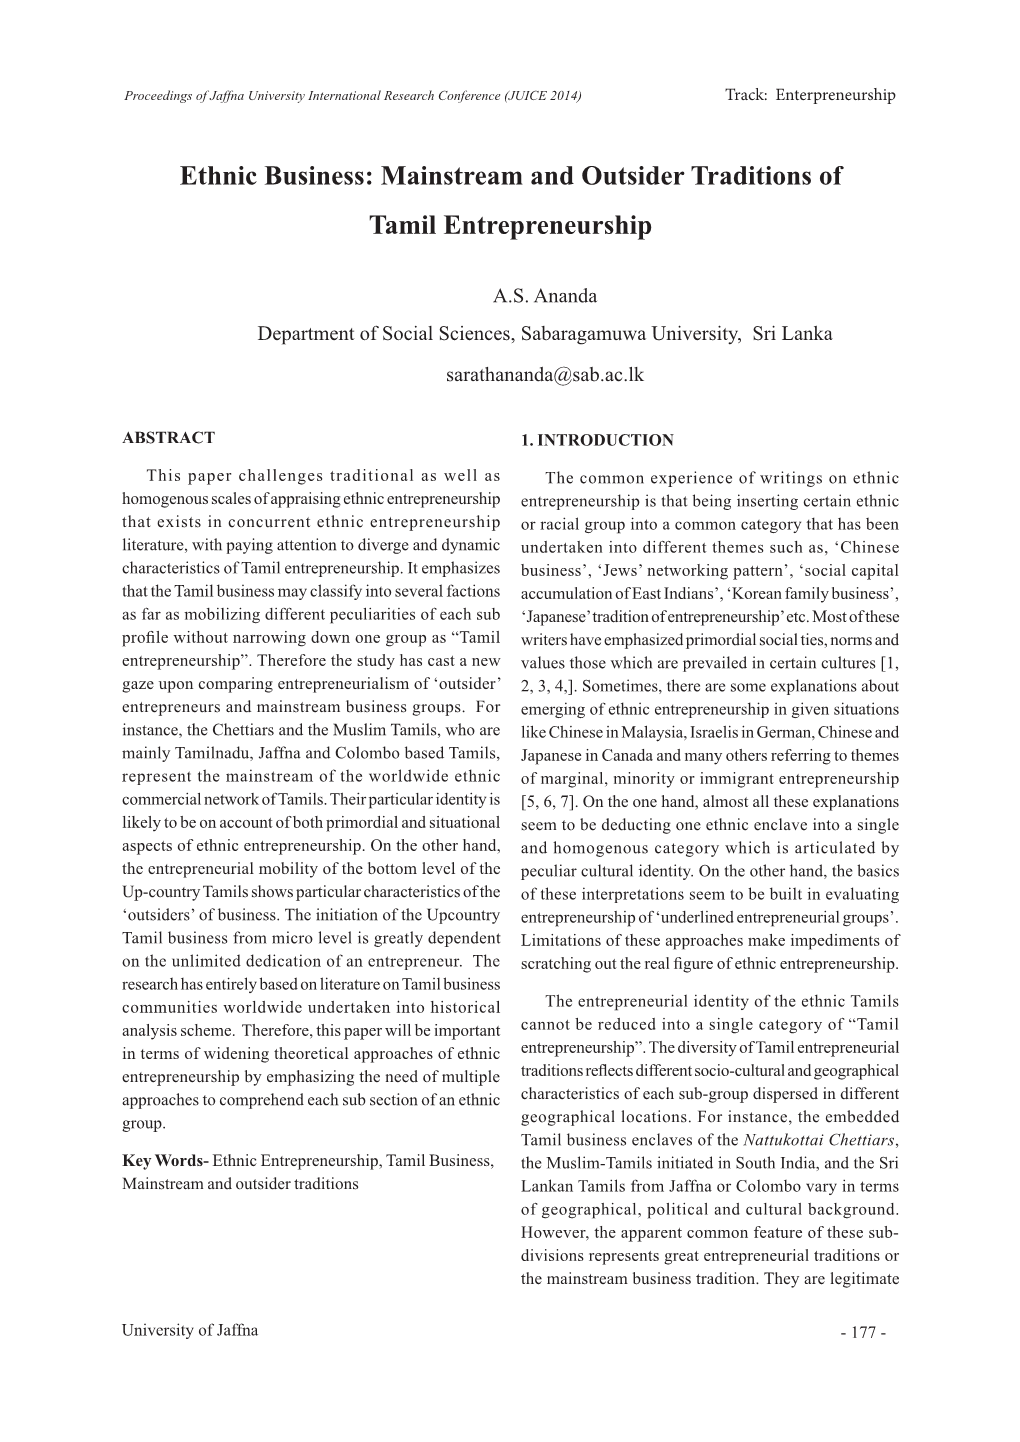 Ethnic Business: Mainstream and Outsider Traditions of Tamil Entrepreneurship